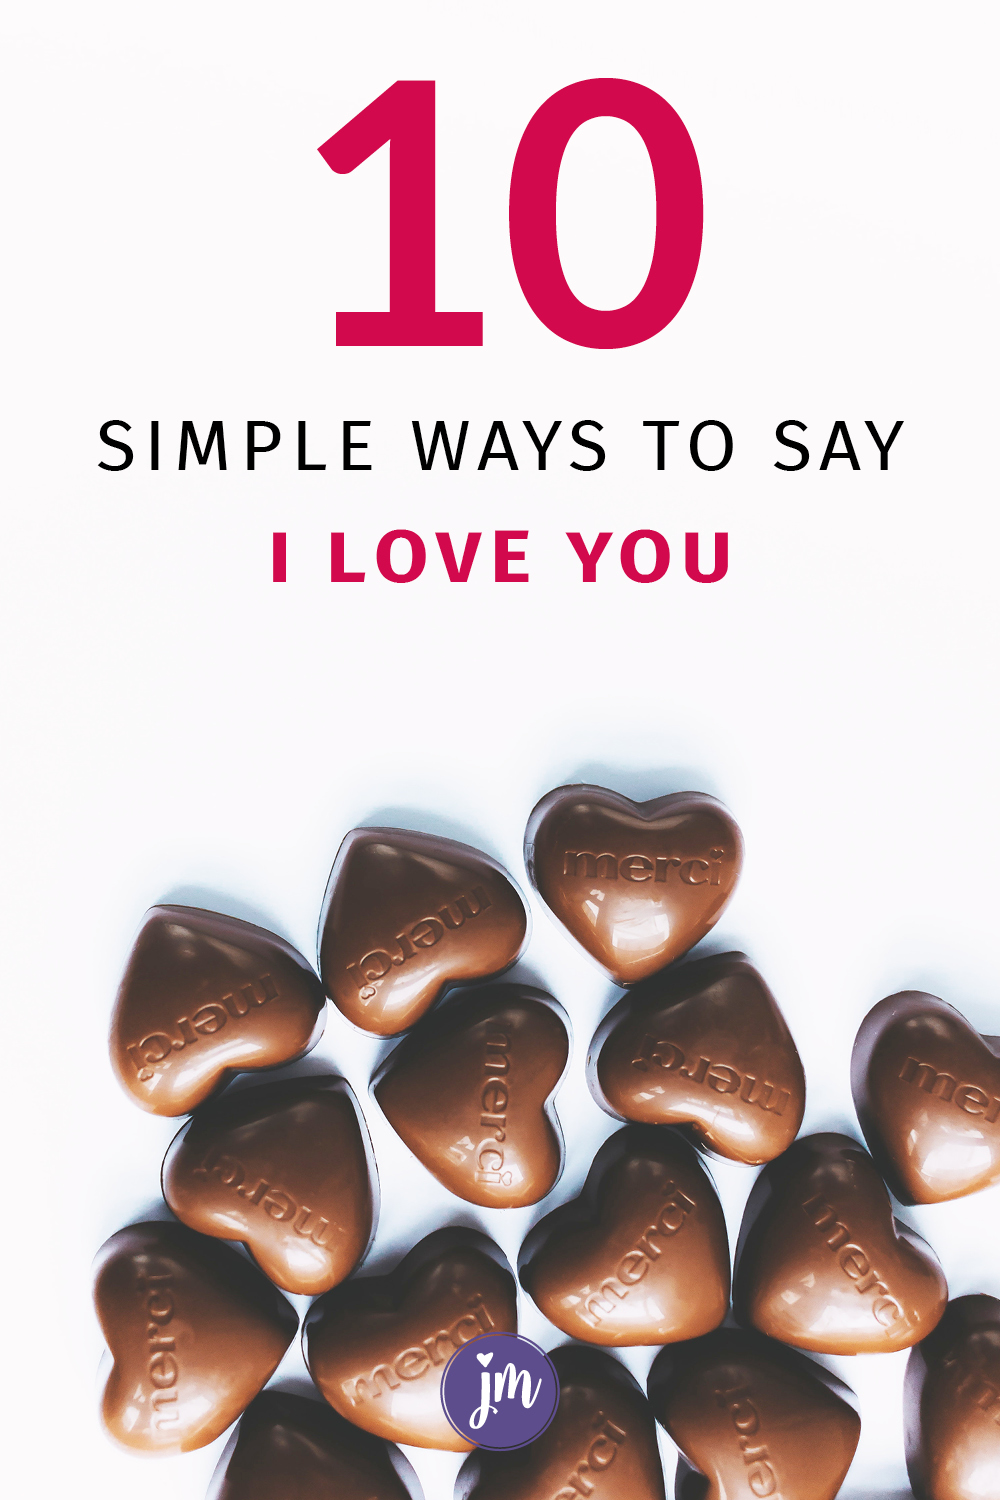 10 Simple Ways to Say, “I Love You!”